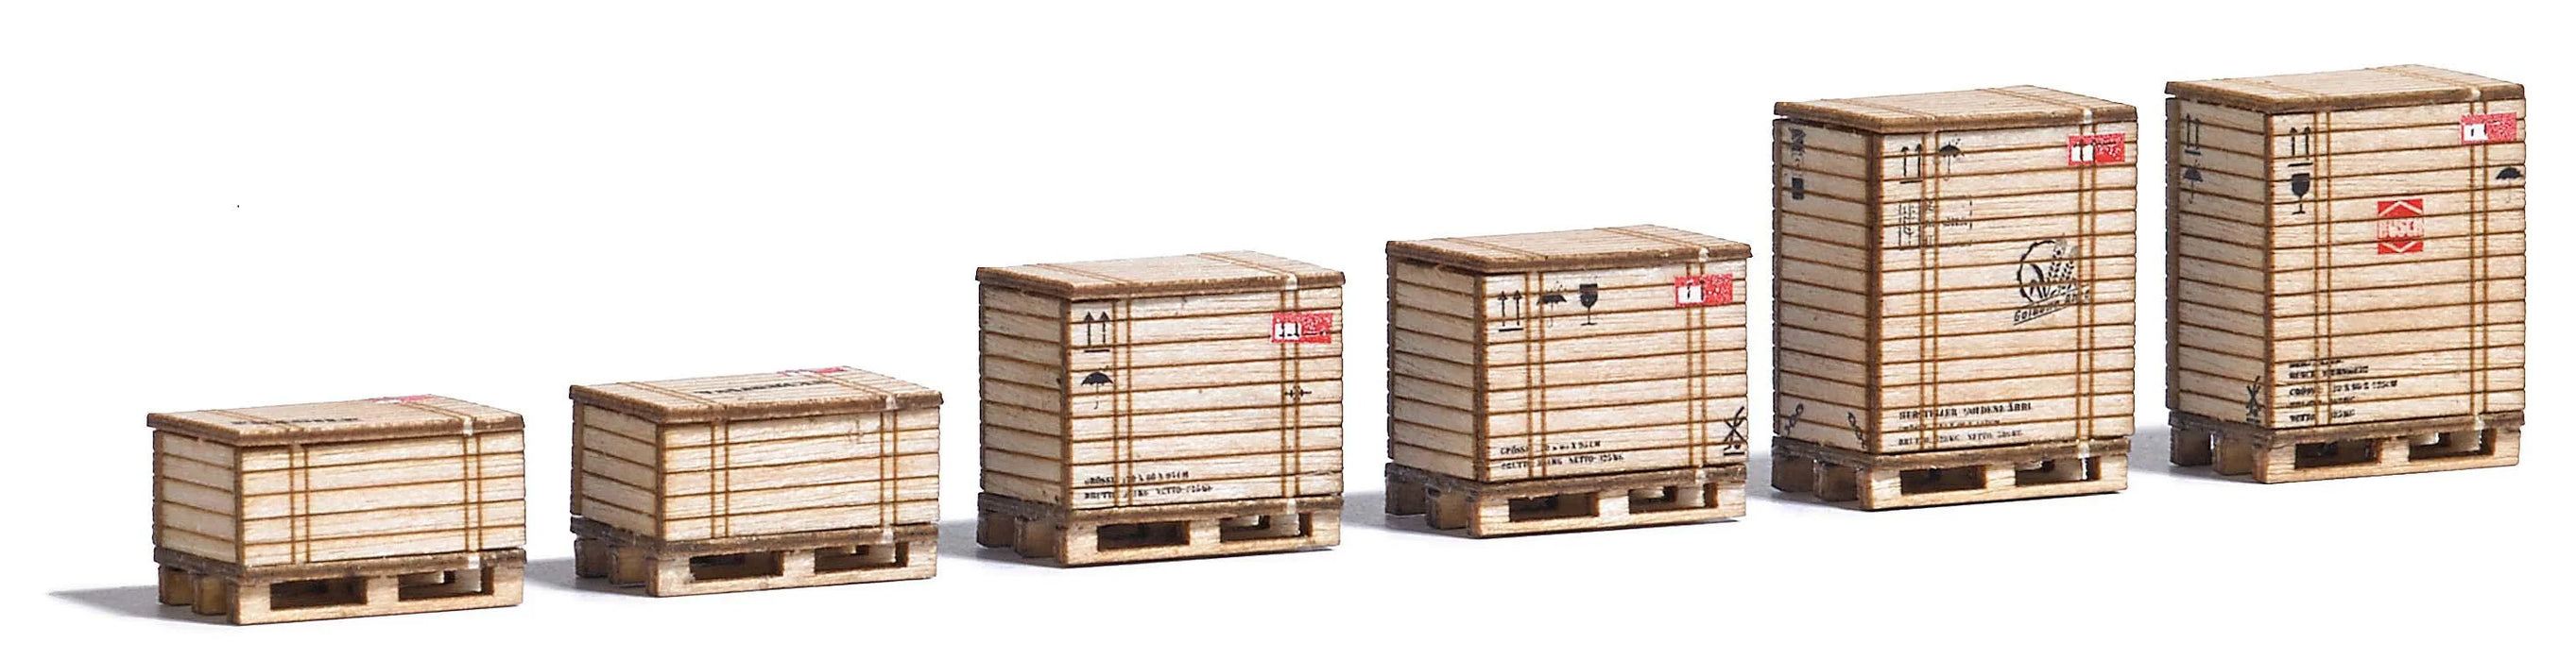 Busch 1811 Pallets & Crates, HO OO Scale